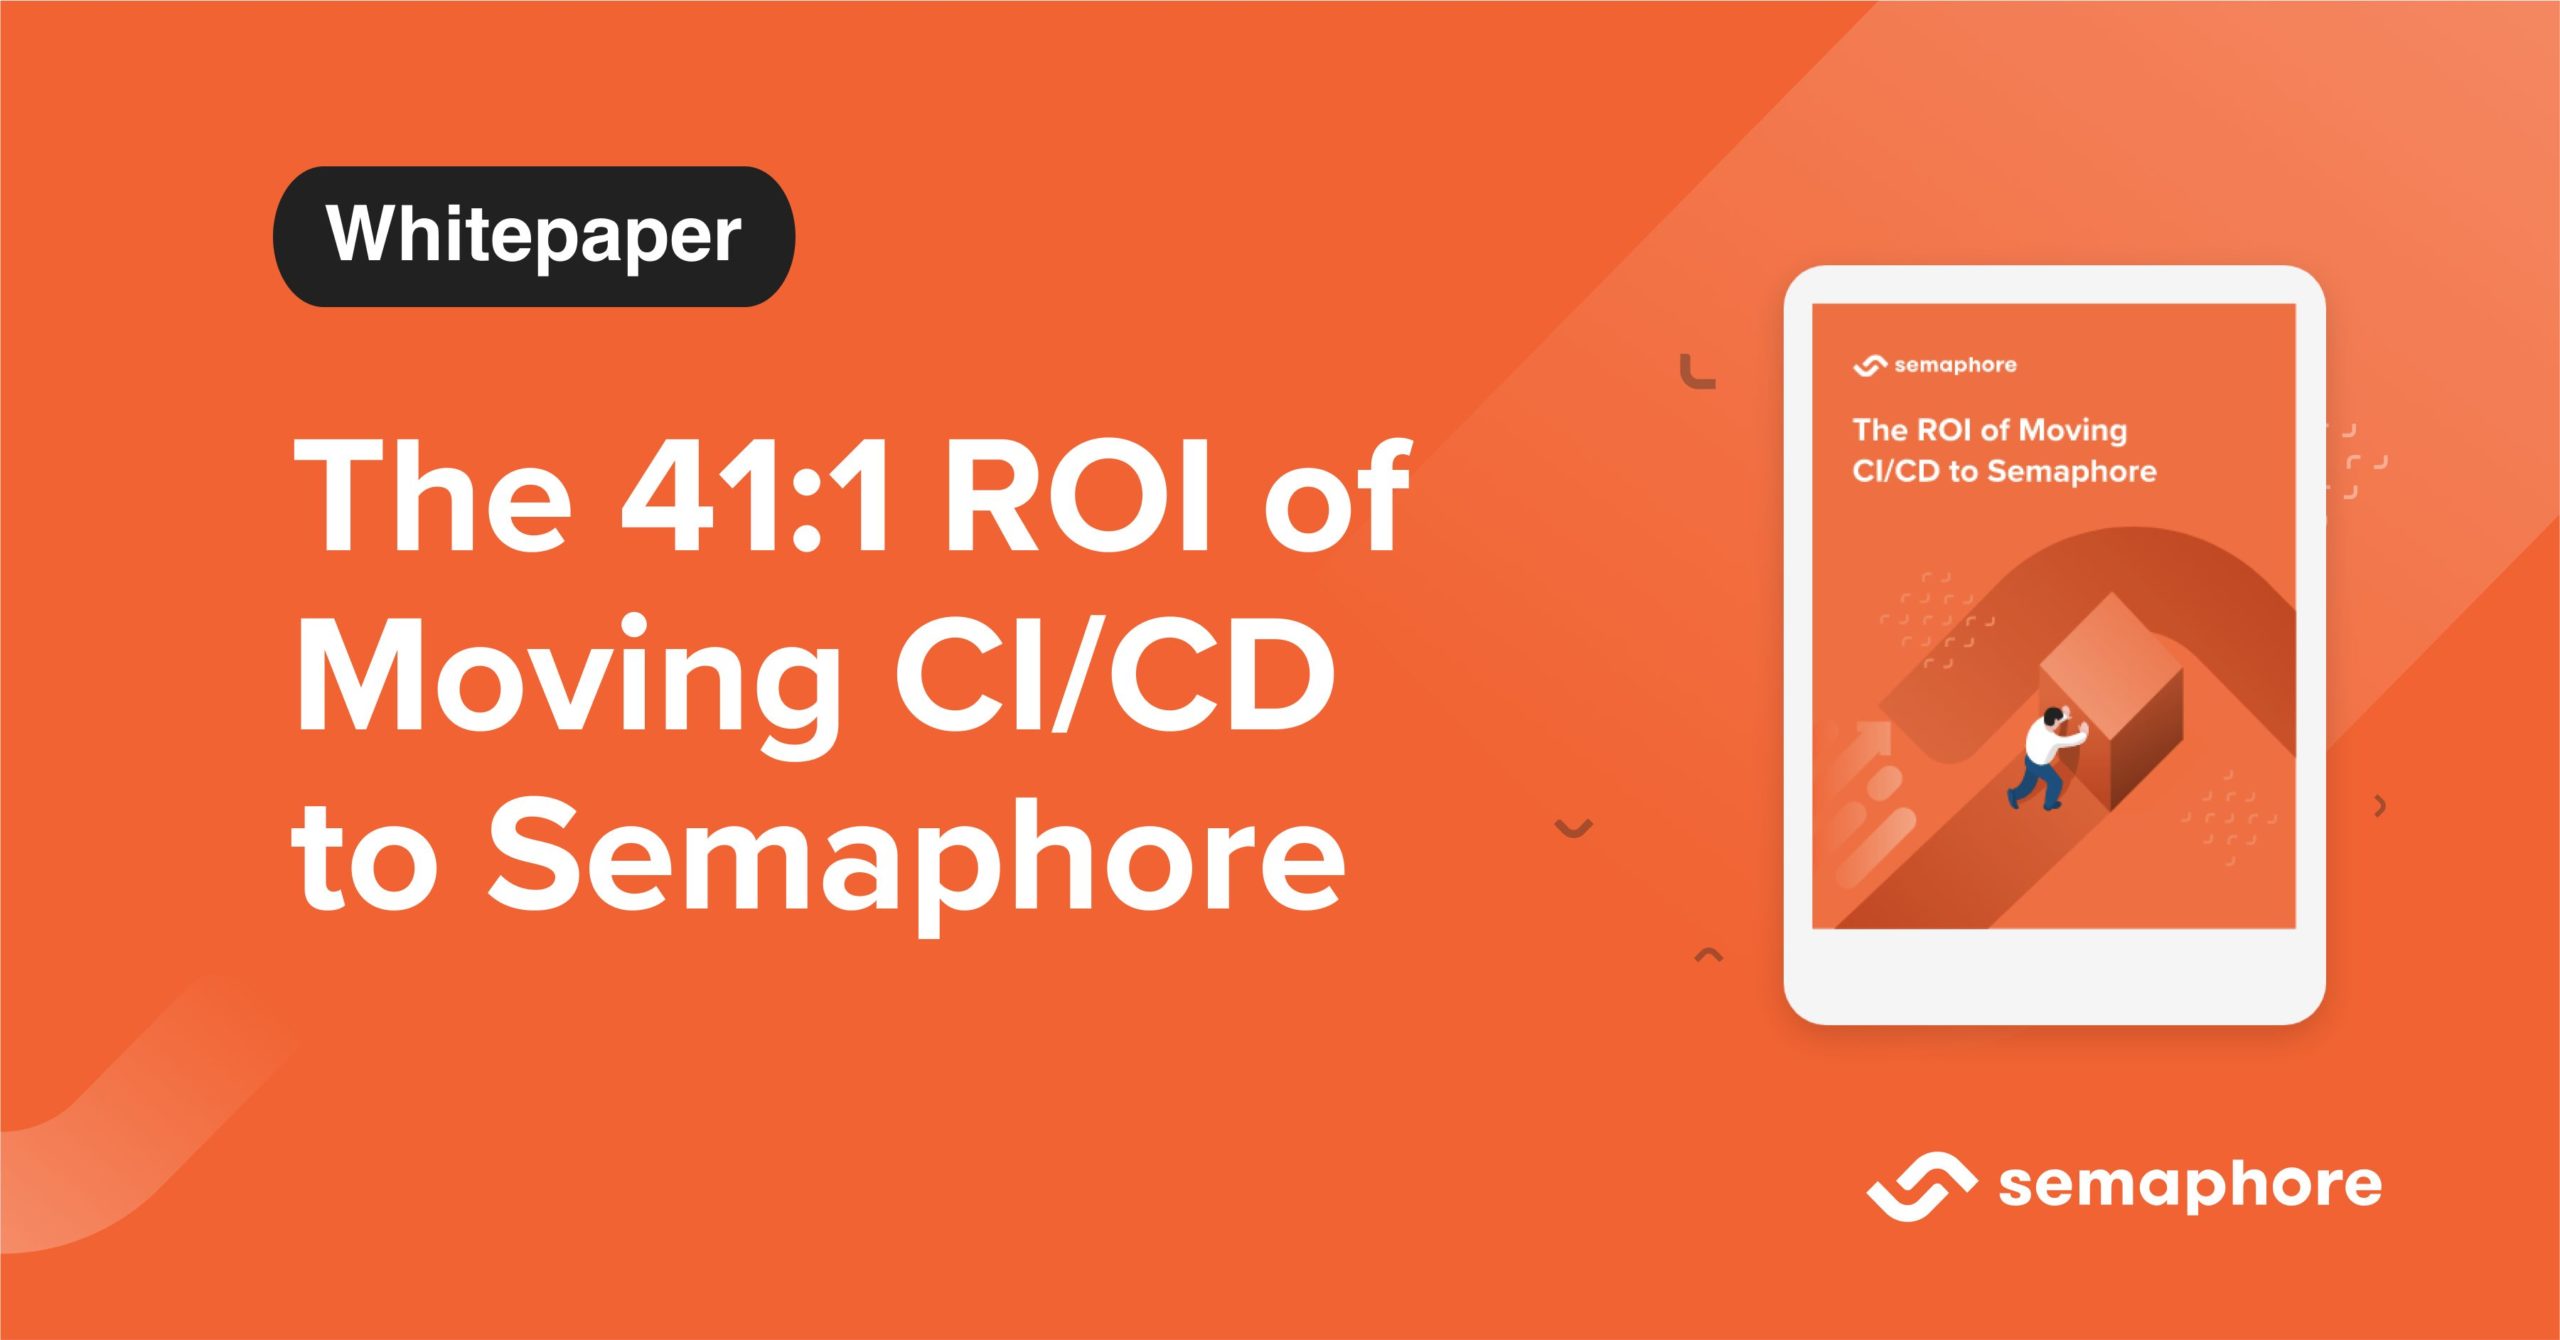 The 41:1 ROI of Moving CI/CD to Semaphore